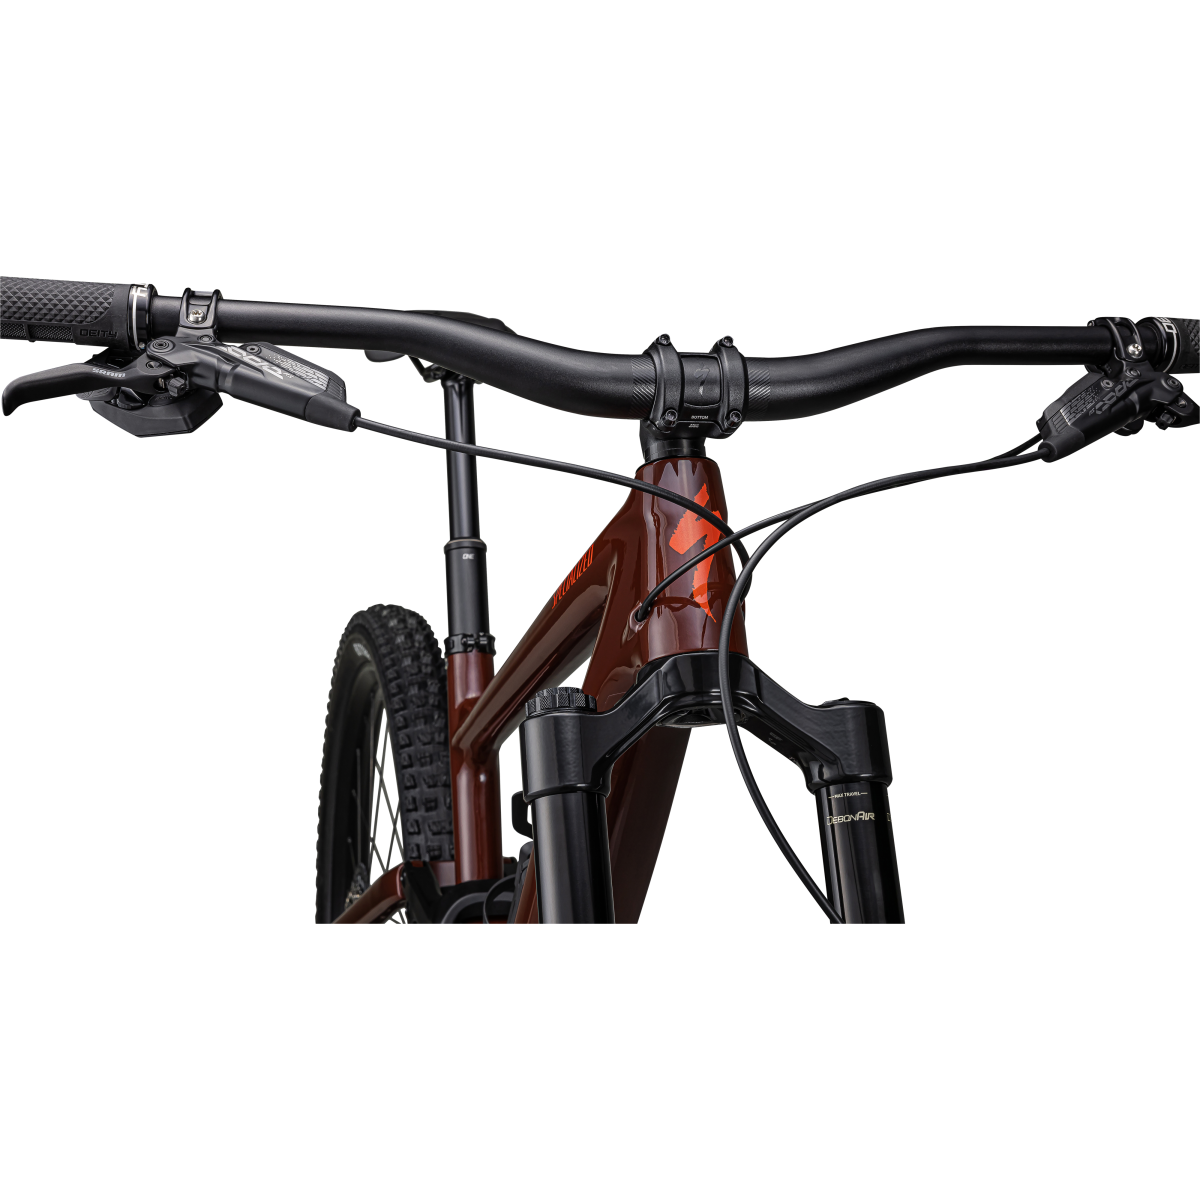 Specialized Enduro Expert kalnų dviratis / Gloss Rusted Red - Redwood